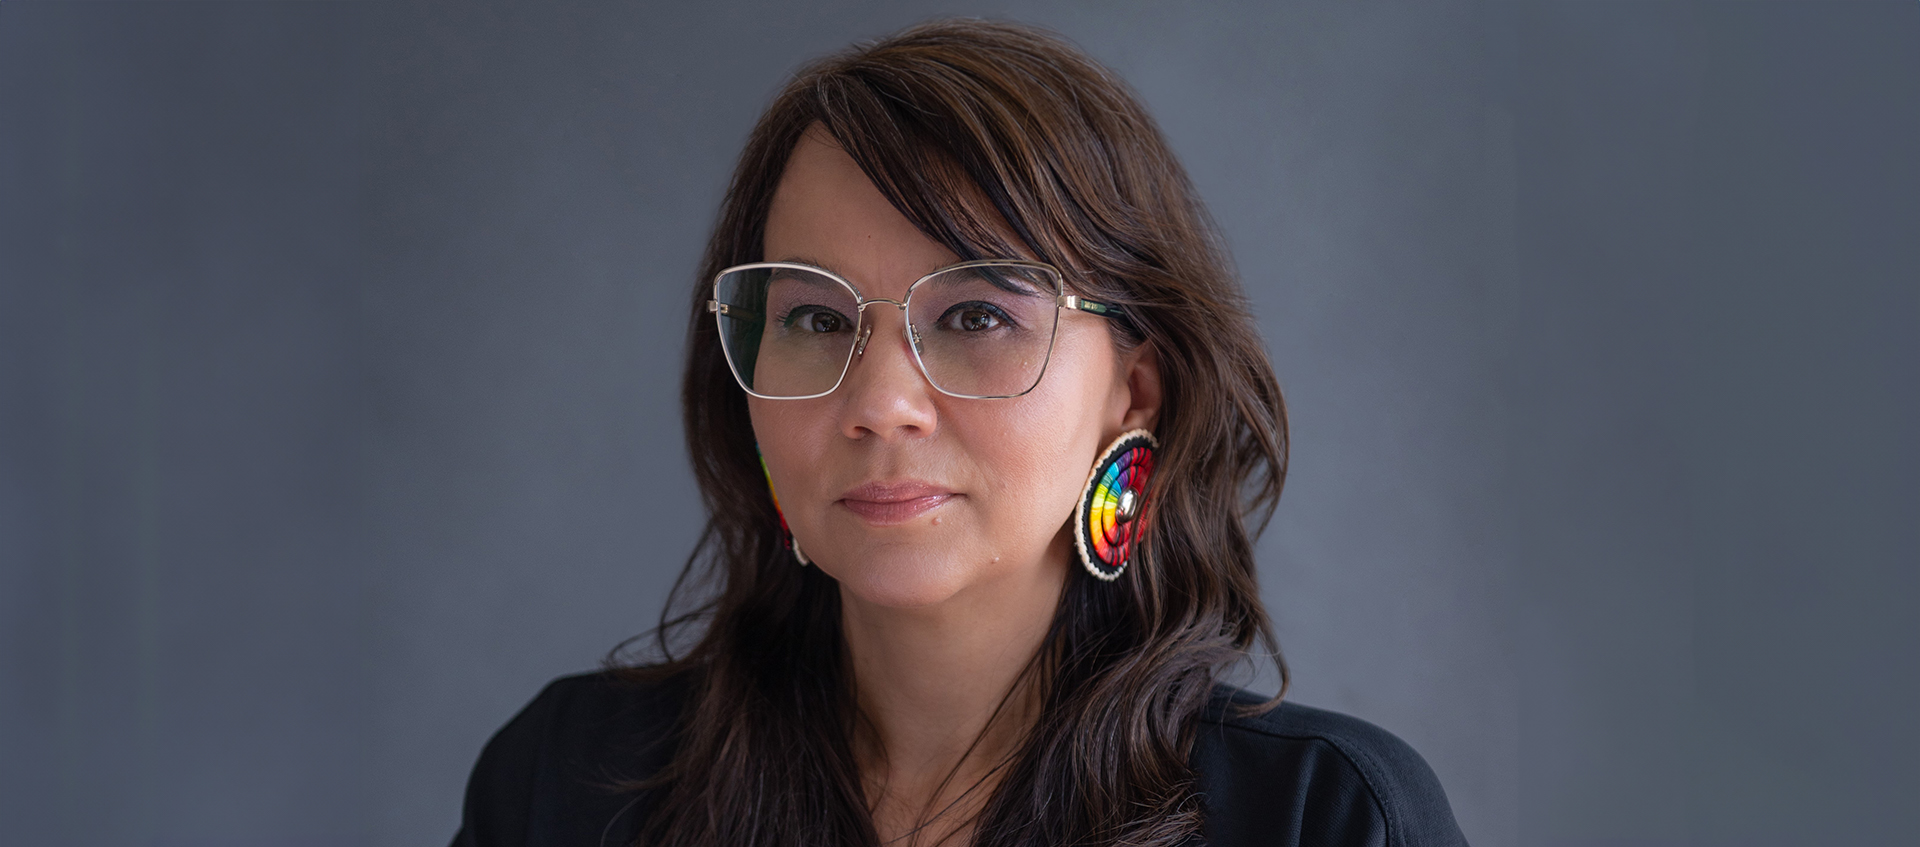 POPortrait of Tanya Lukin Linklater. She has long brown hair, a medium skin tone, and wears geometric silver glasses, beaded earrings, and a dark shirt.